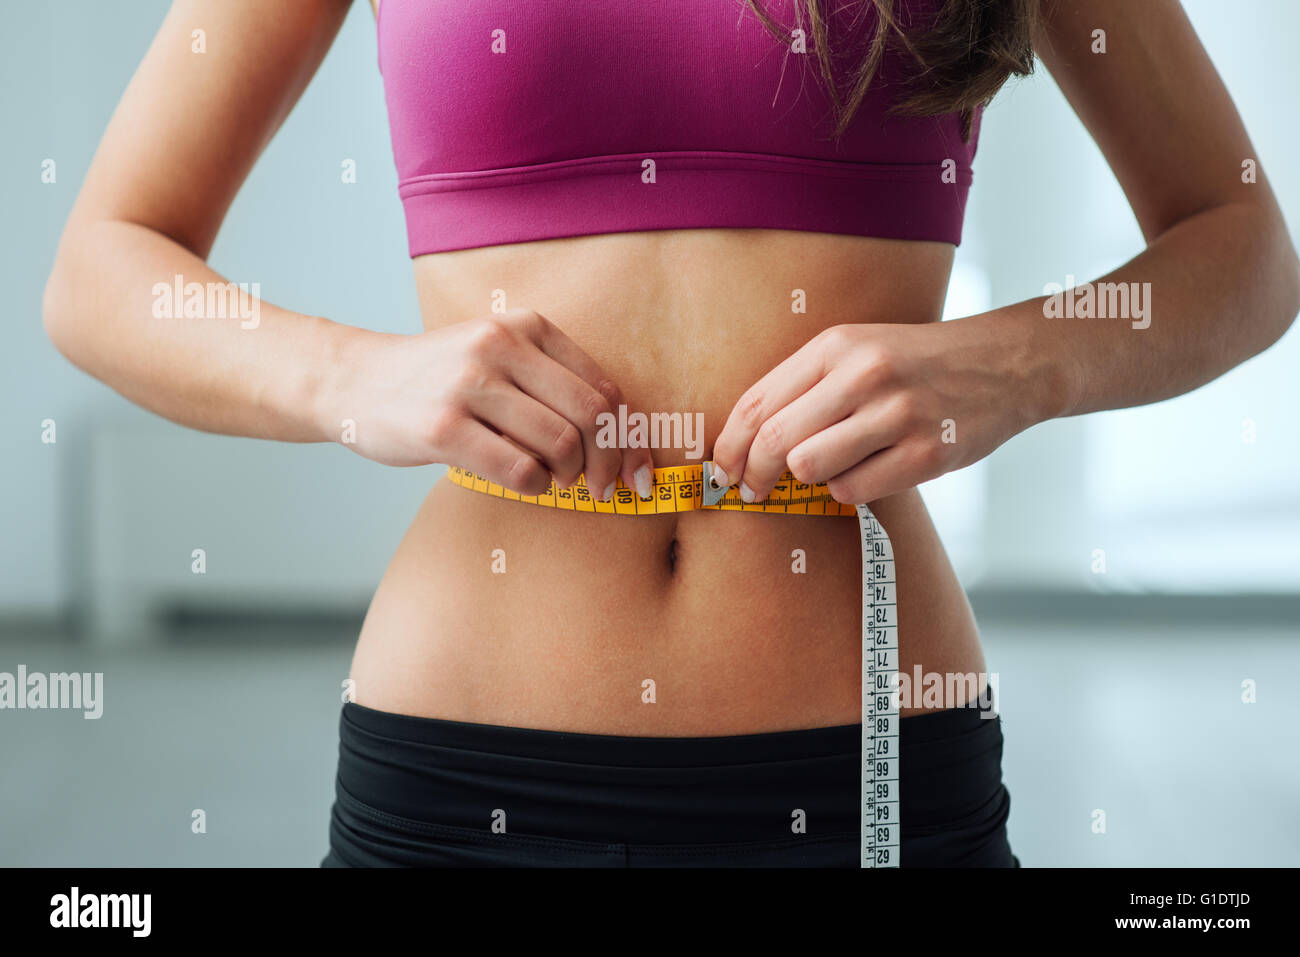 Thin waist Free Stock Photos, Images, and Pictures of Thin waist